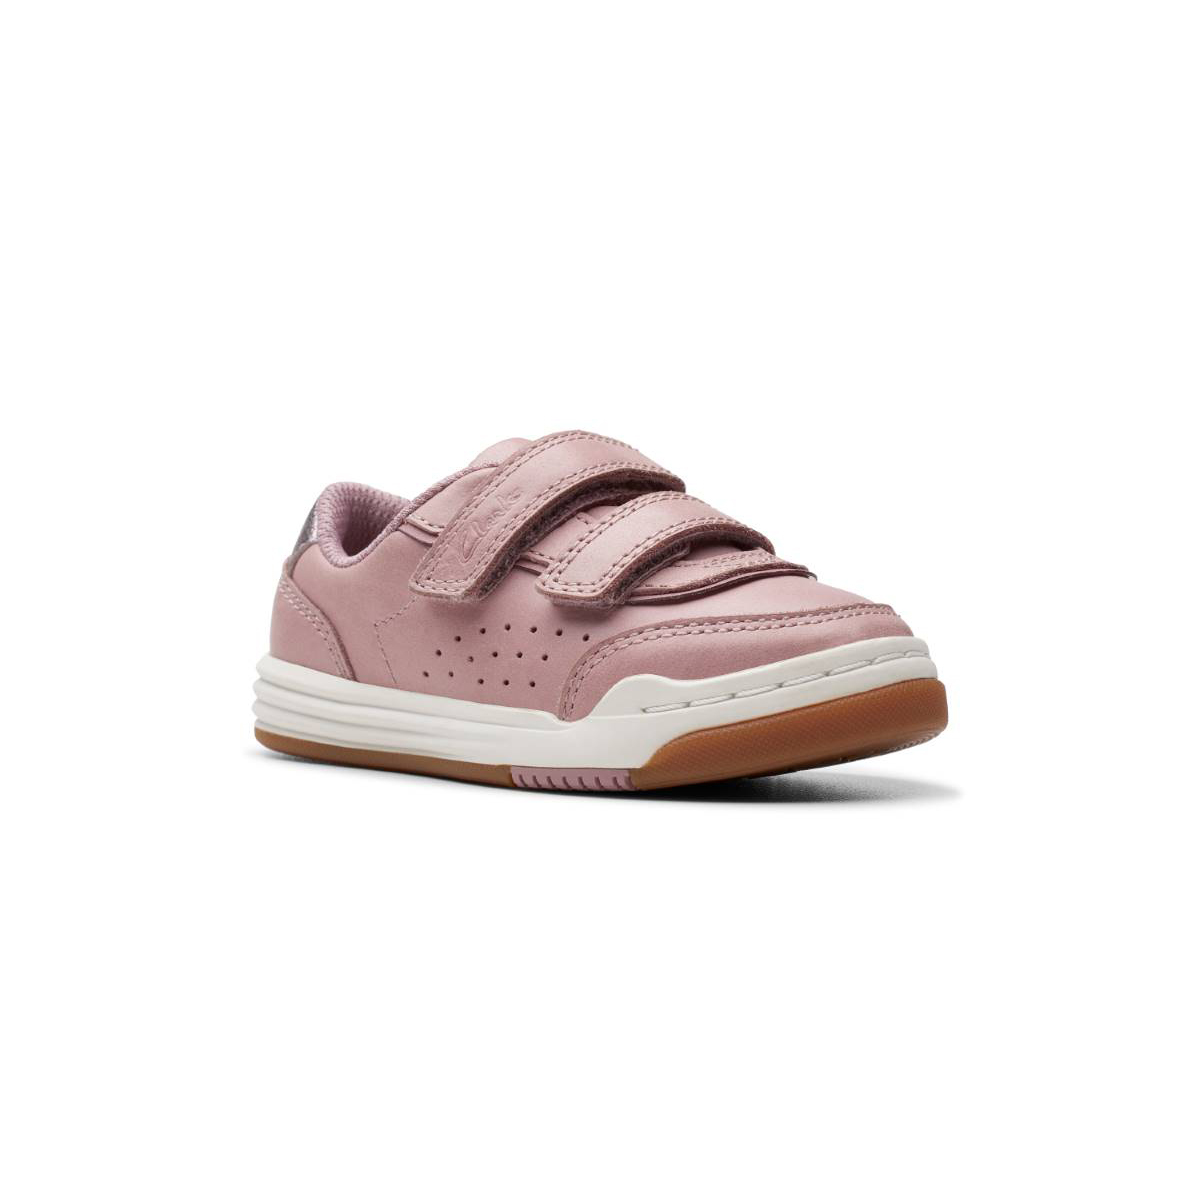 Clarks Urban Solo T Pink Leather Kids first shoes 7666-56F in a Plain Leather in Size 6.5